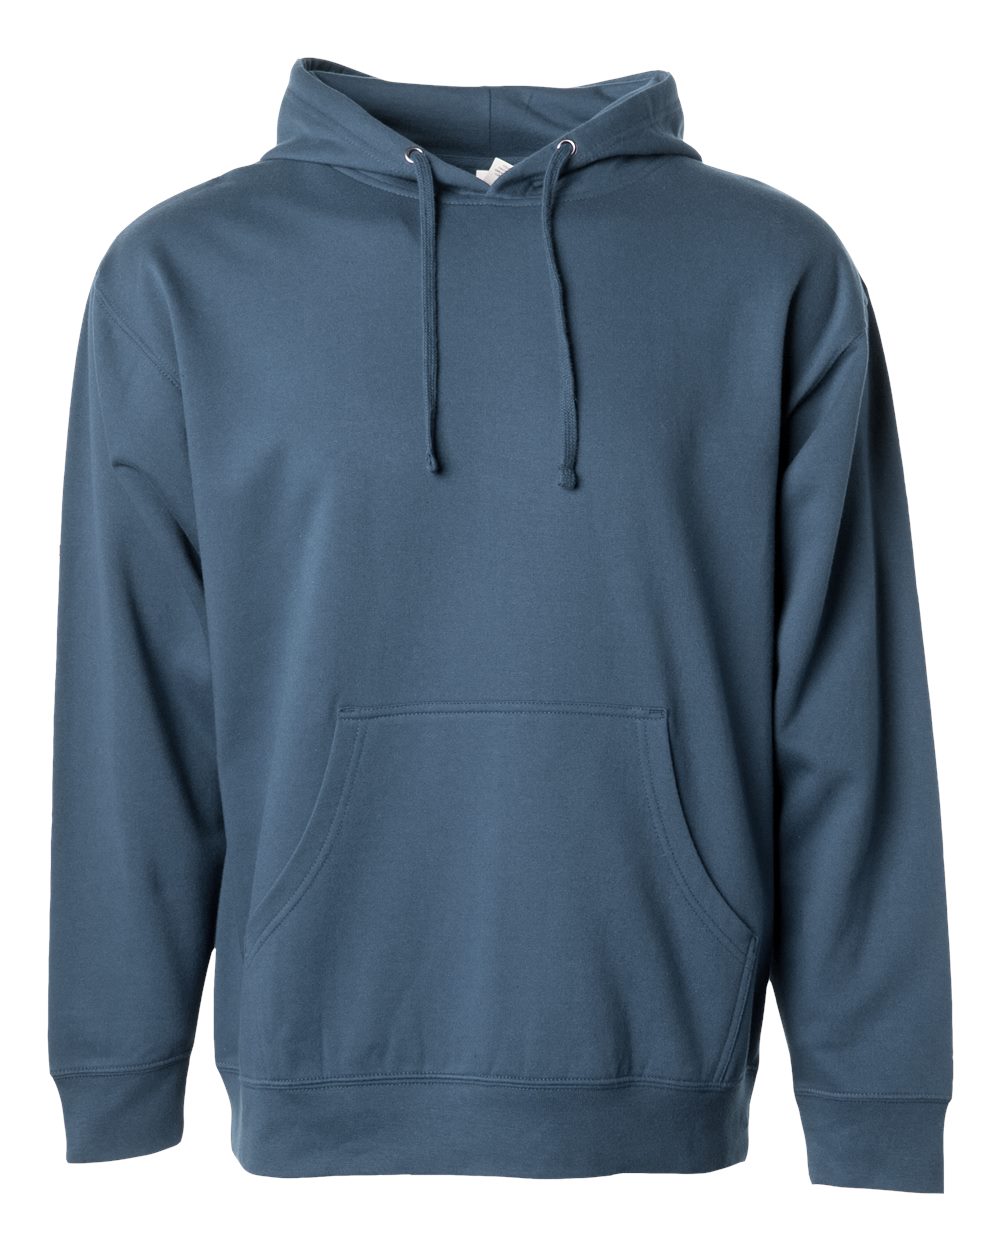 Independent Trading Co. SS4500 - Midweight Hooded Pullover Sweatshirt  $13.33 - Sweatshirts